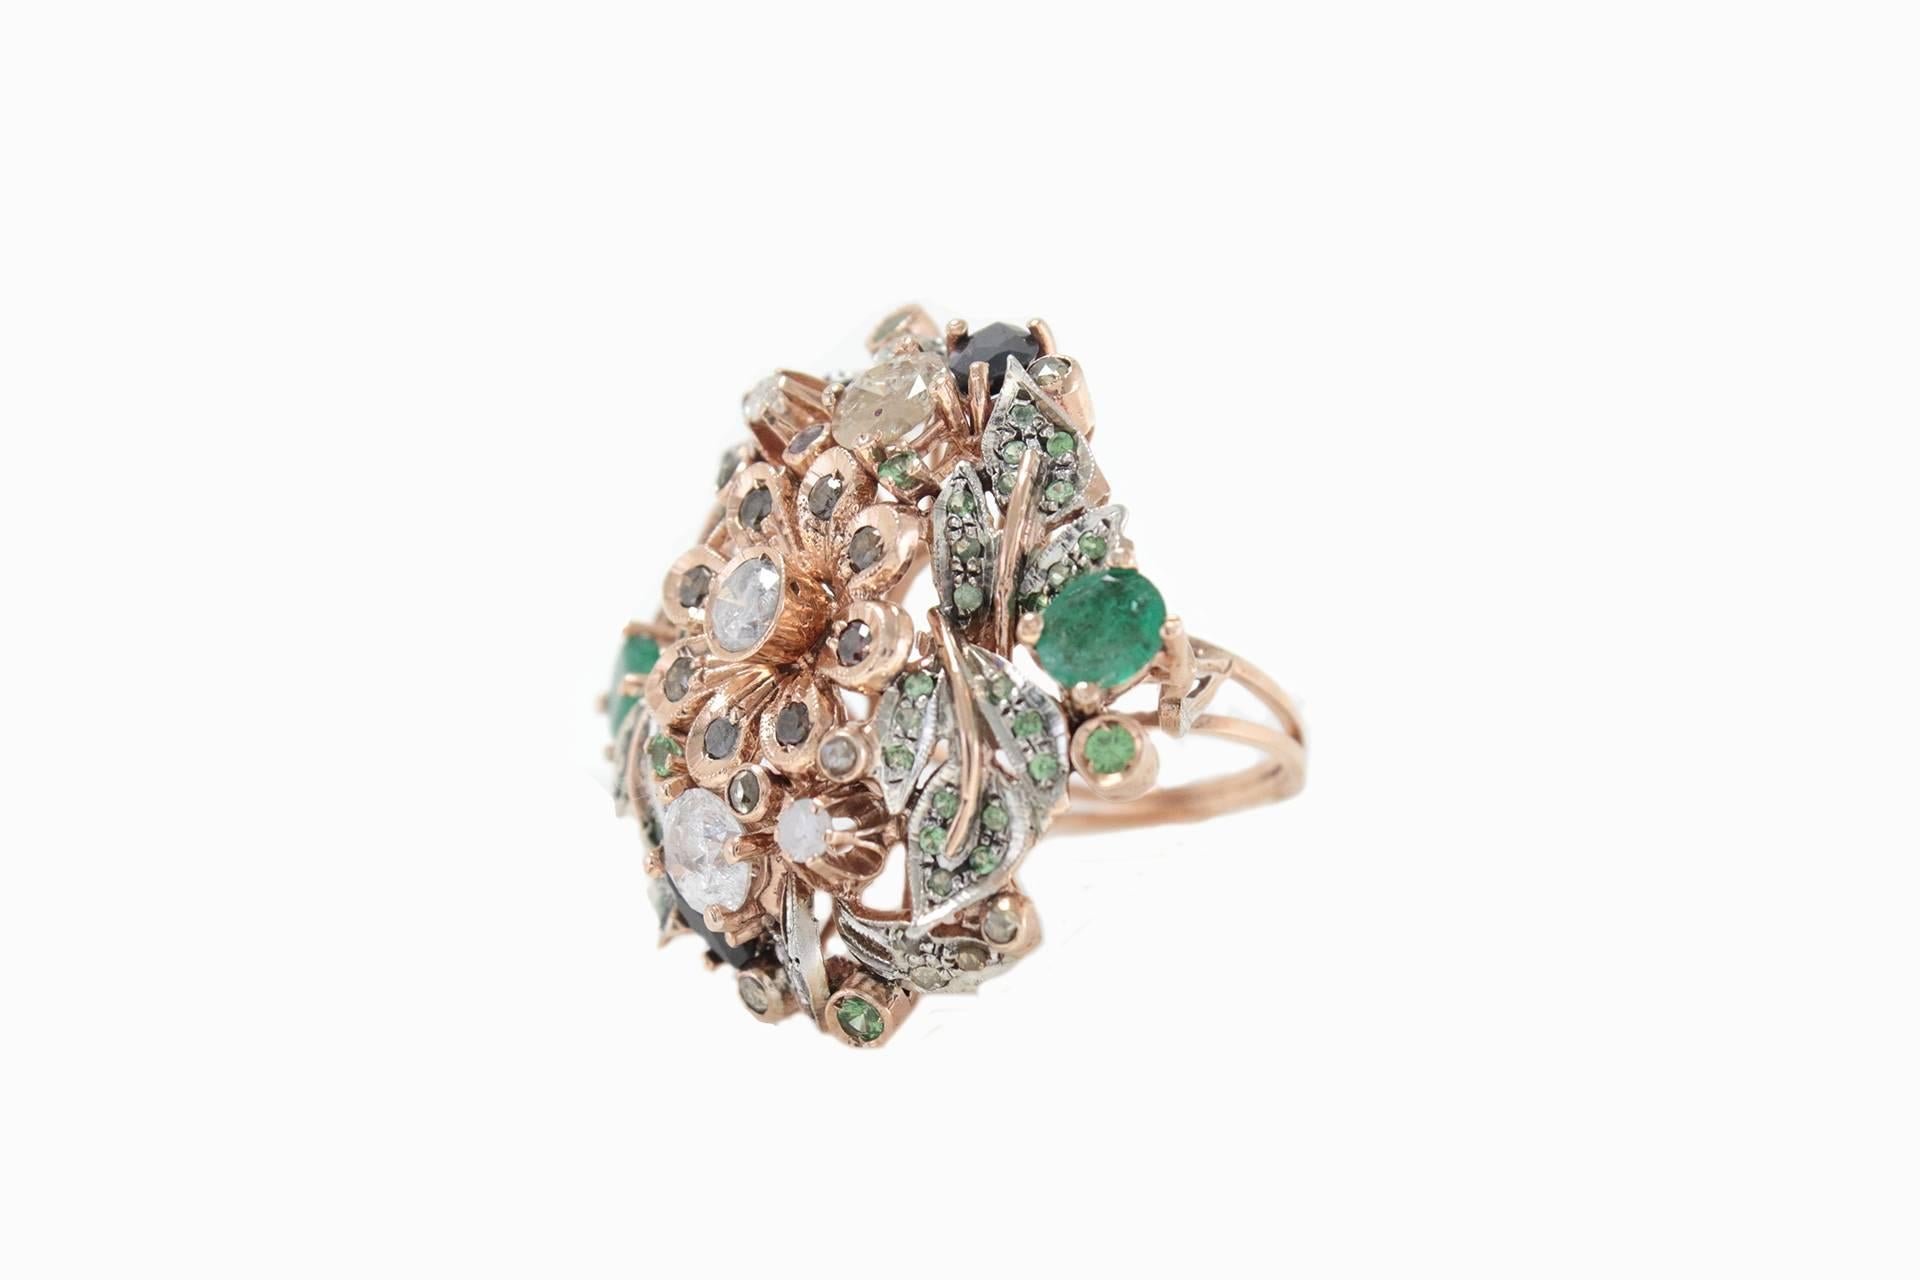 Exquisite ring in 9Kt gold and silver embellished with black and white diamonds with a spritz of emeralds and tsavorite to mix all the colors in a delicate balanced bouquet.

diamonds(3.31Kt) 
emeralds(2.54Kt) 
tsavorite(0.89Kt)
tot weight